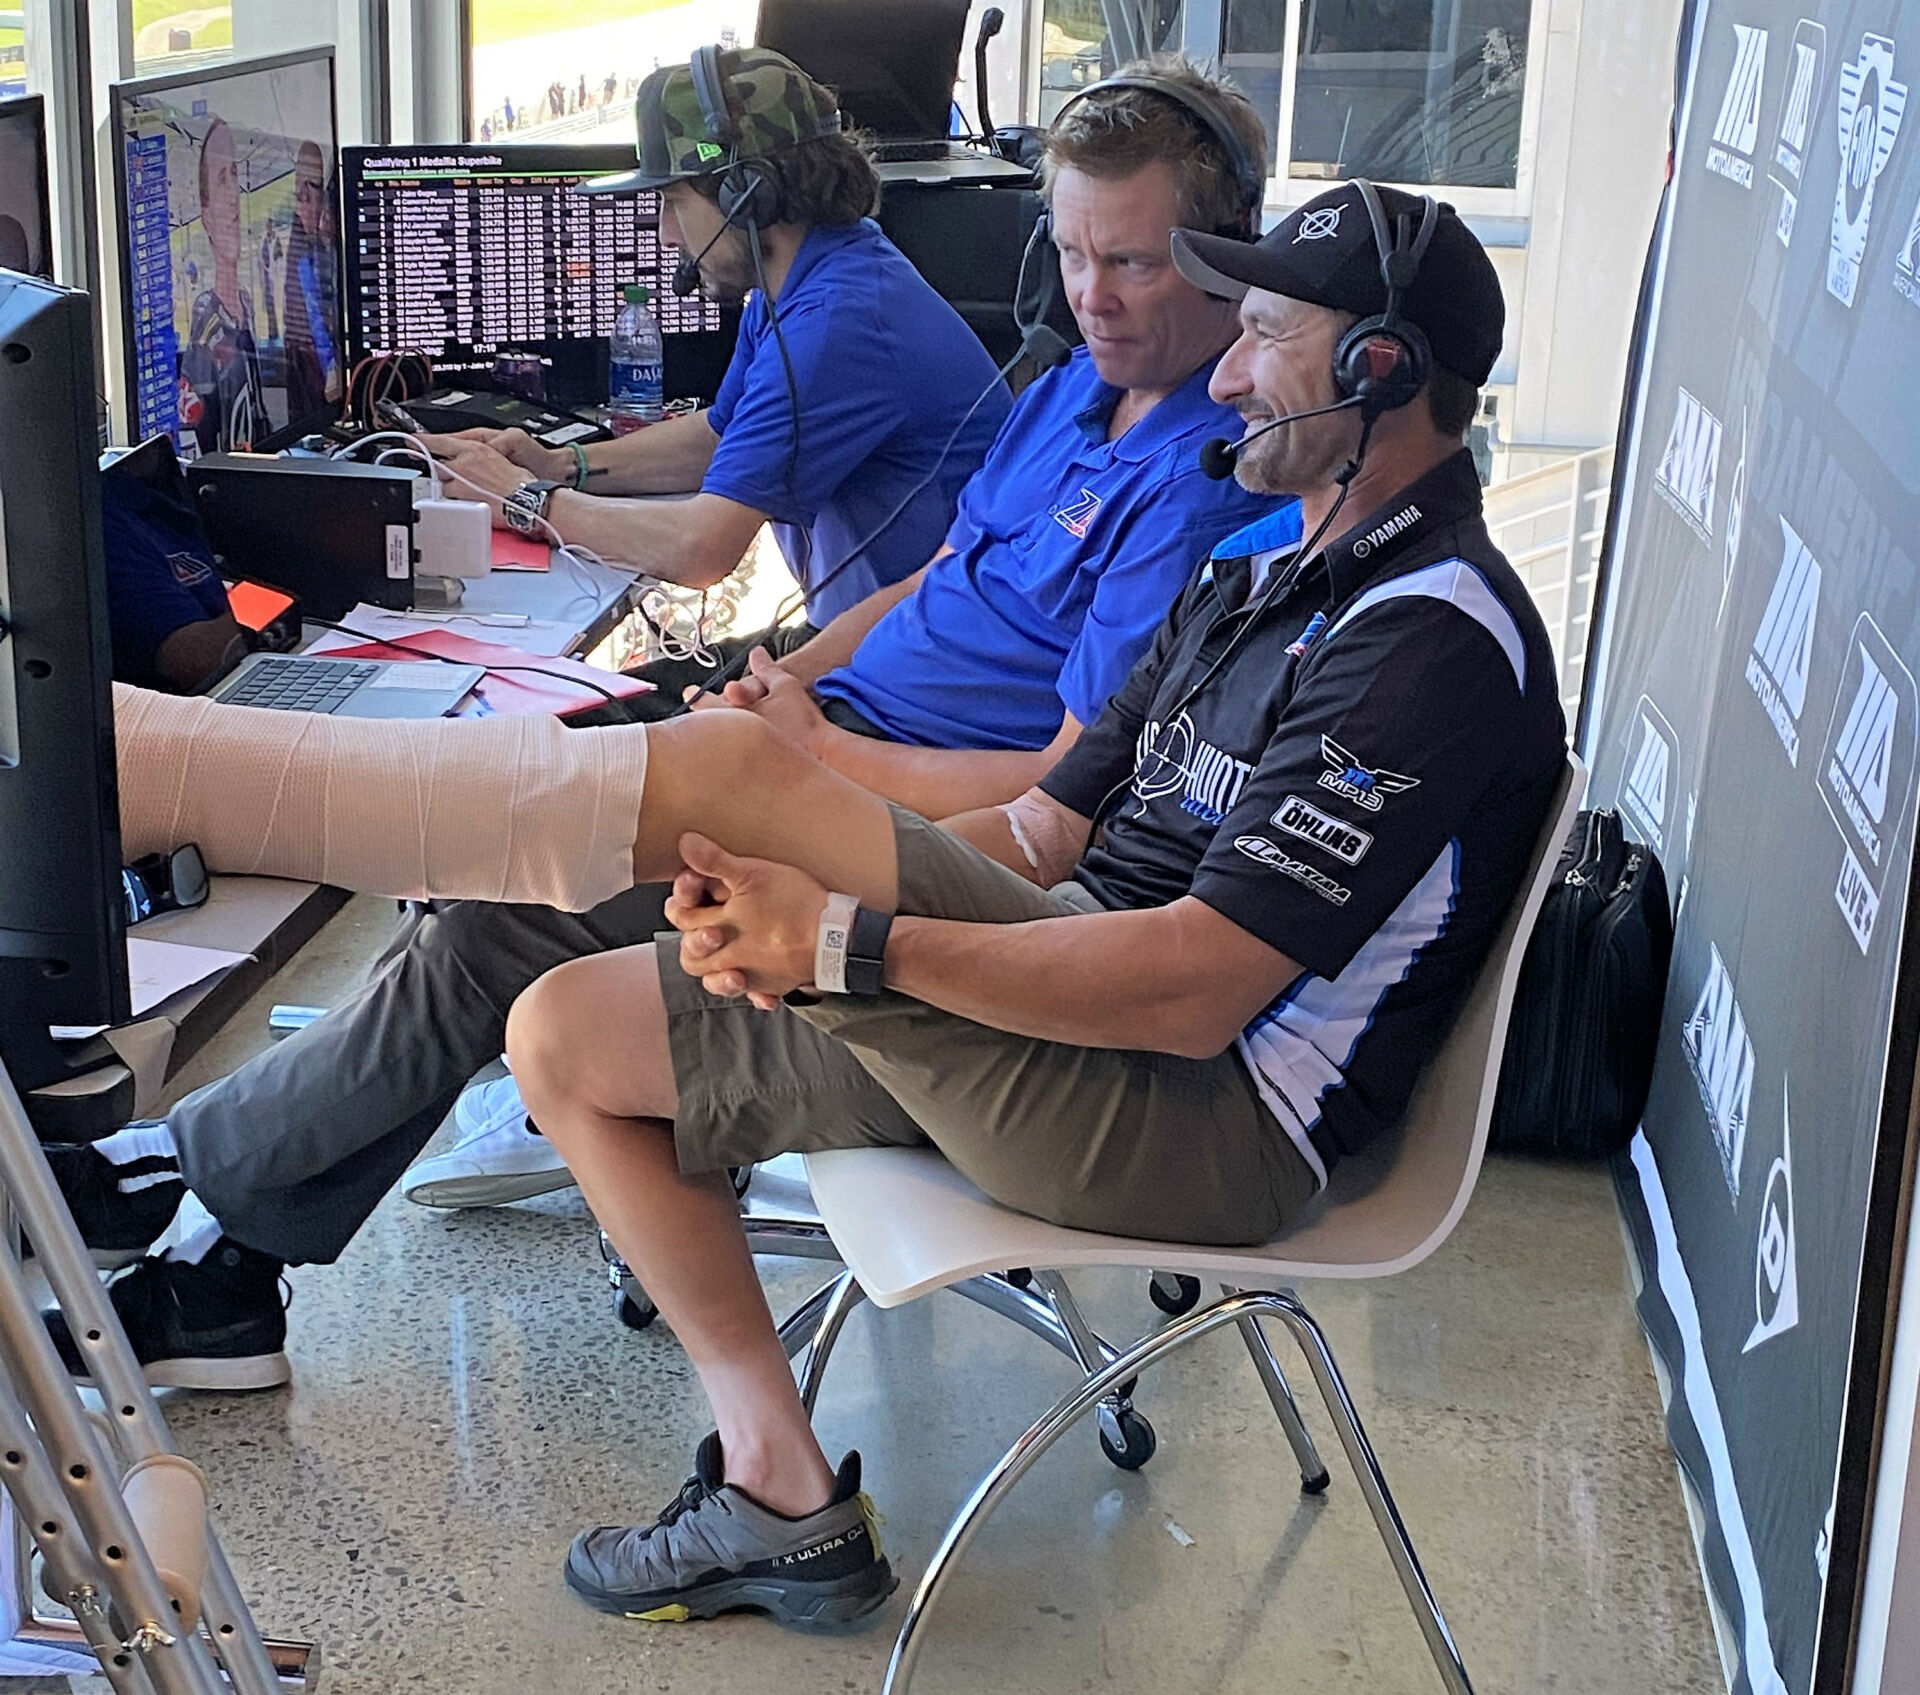 Josh Hayes (right), with his broken left leg elevated, joins Robbie Floyd (center), and Roger Hayden (left) in the MotoAmerica Live+ announcing booth at Barber Motorsports Park. Photo by David Swarts.